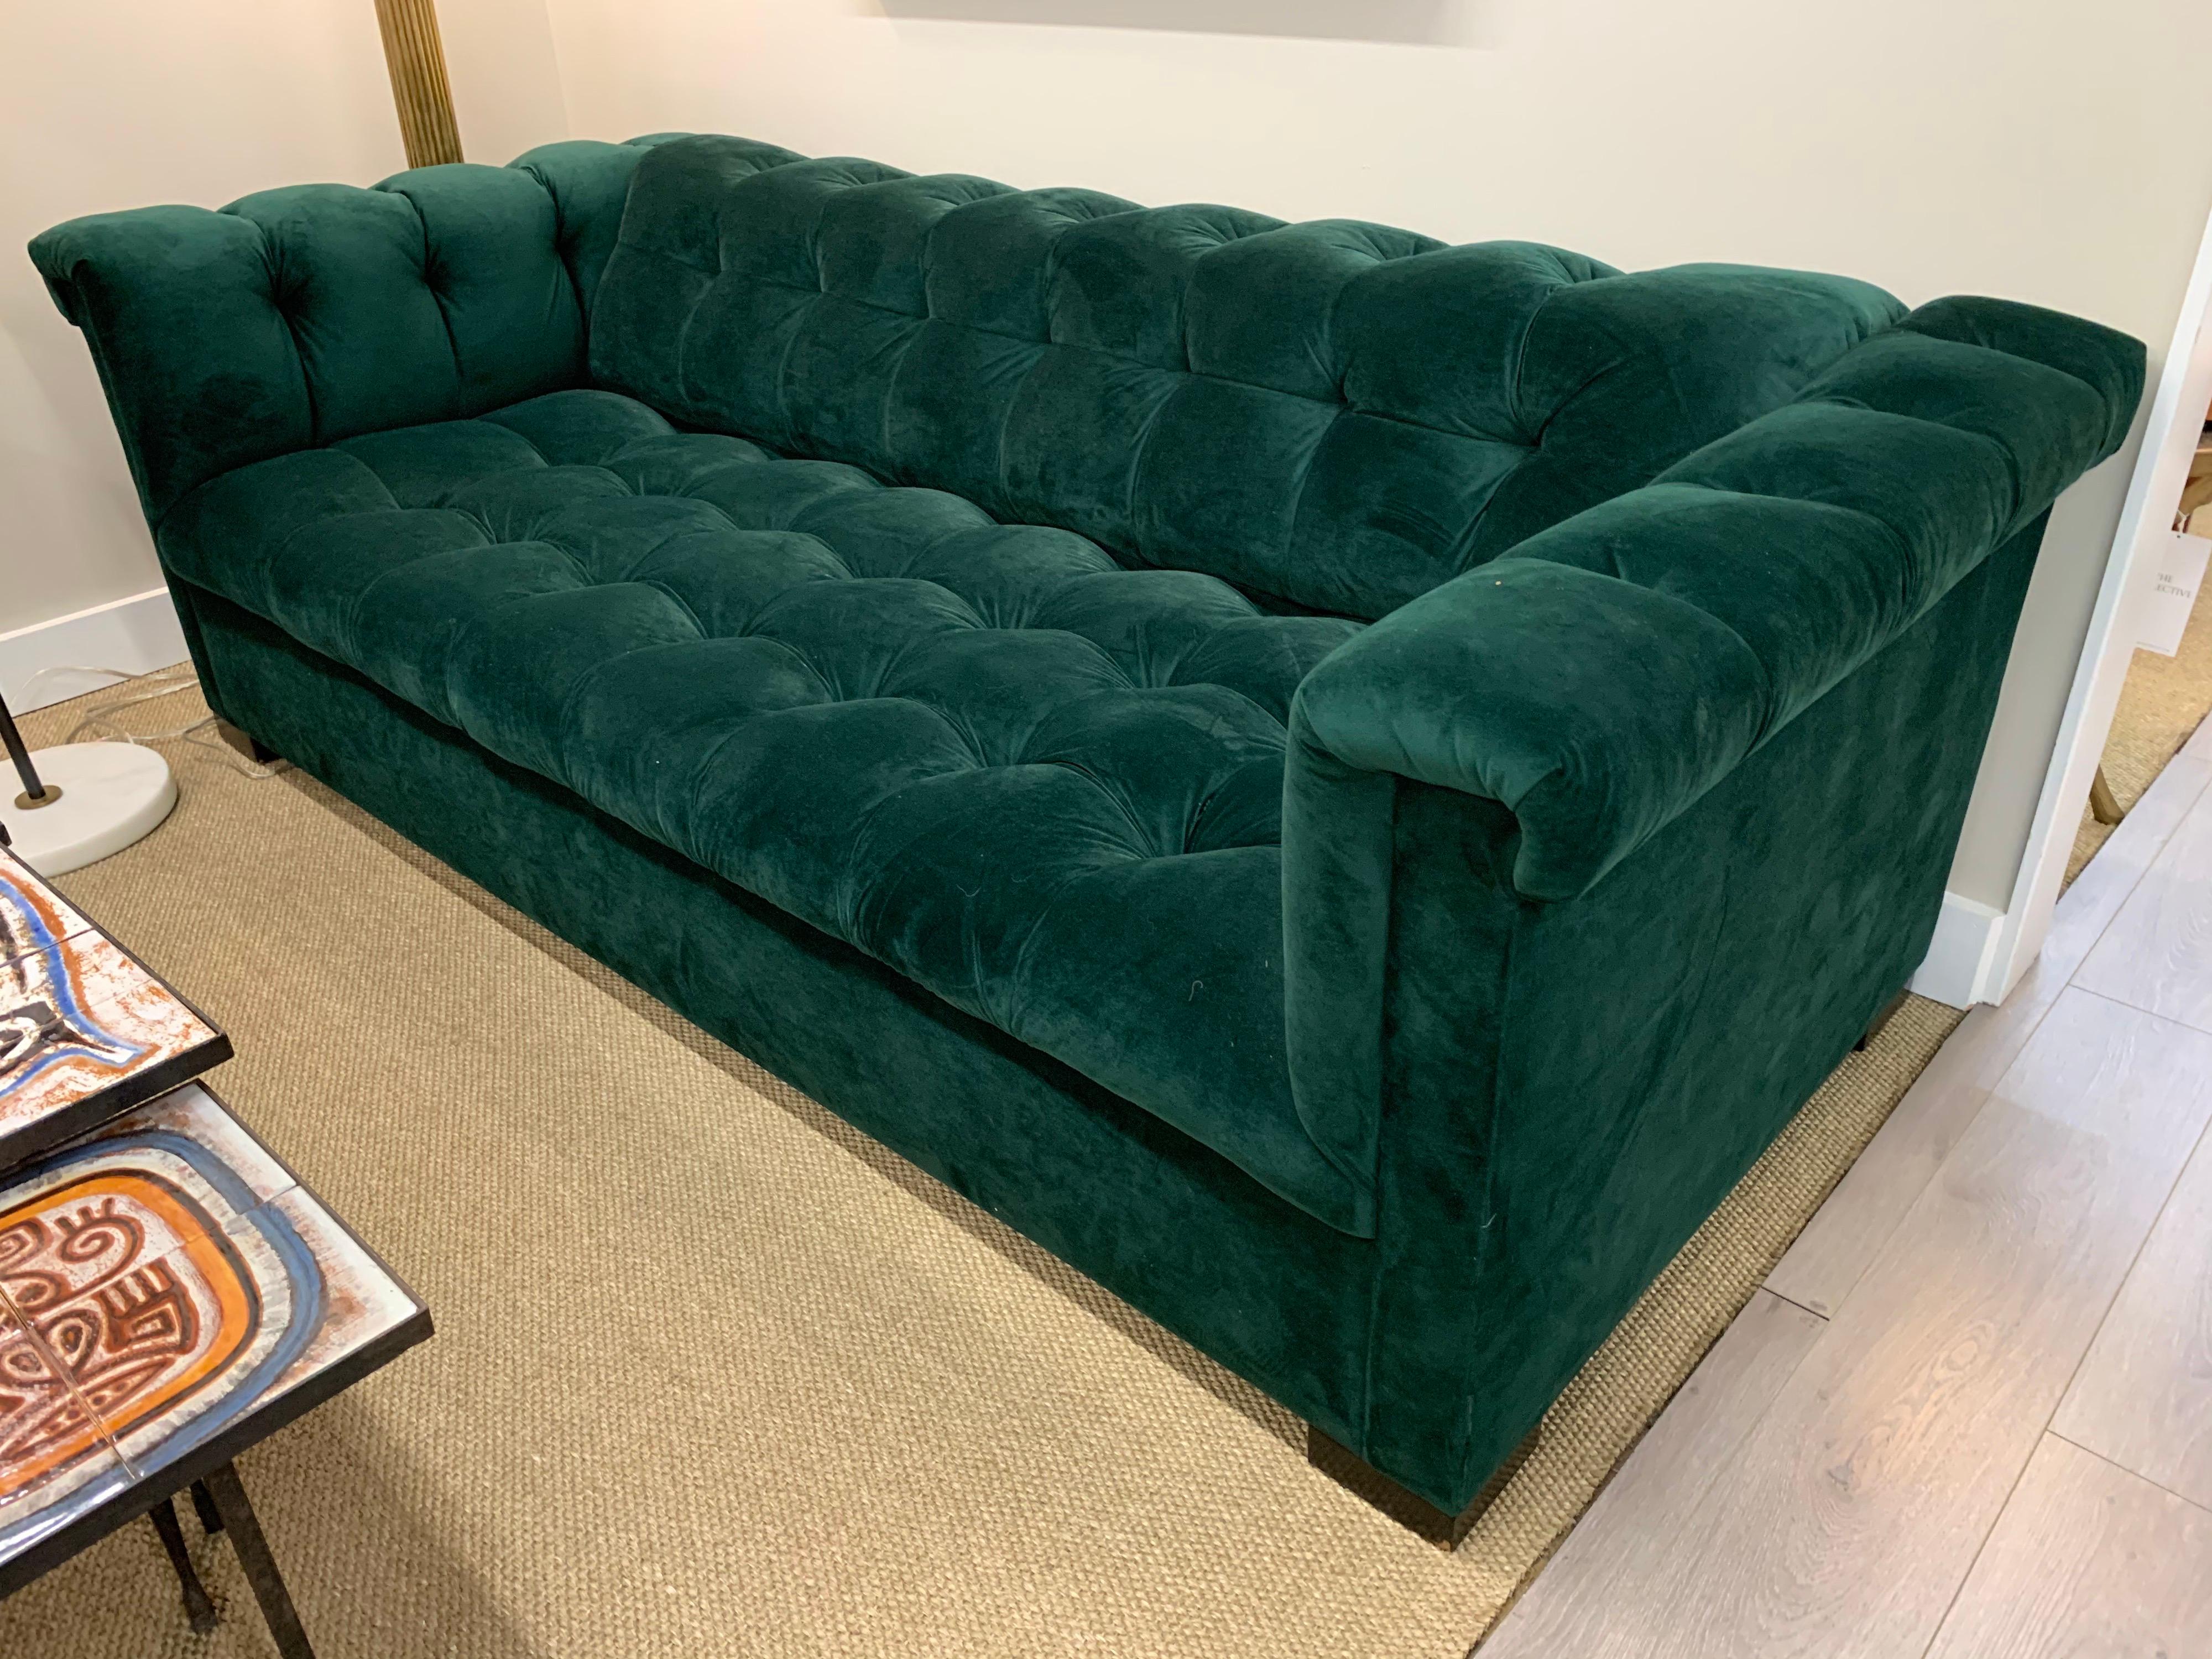 Exceptional, bespoke tufted green velvet sofa with chesterfield design. The fabric is magnificent, the lines perfect, and the craftsmanship second to none. It has never been sat in for more than a moment.
 